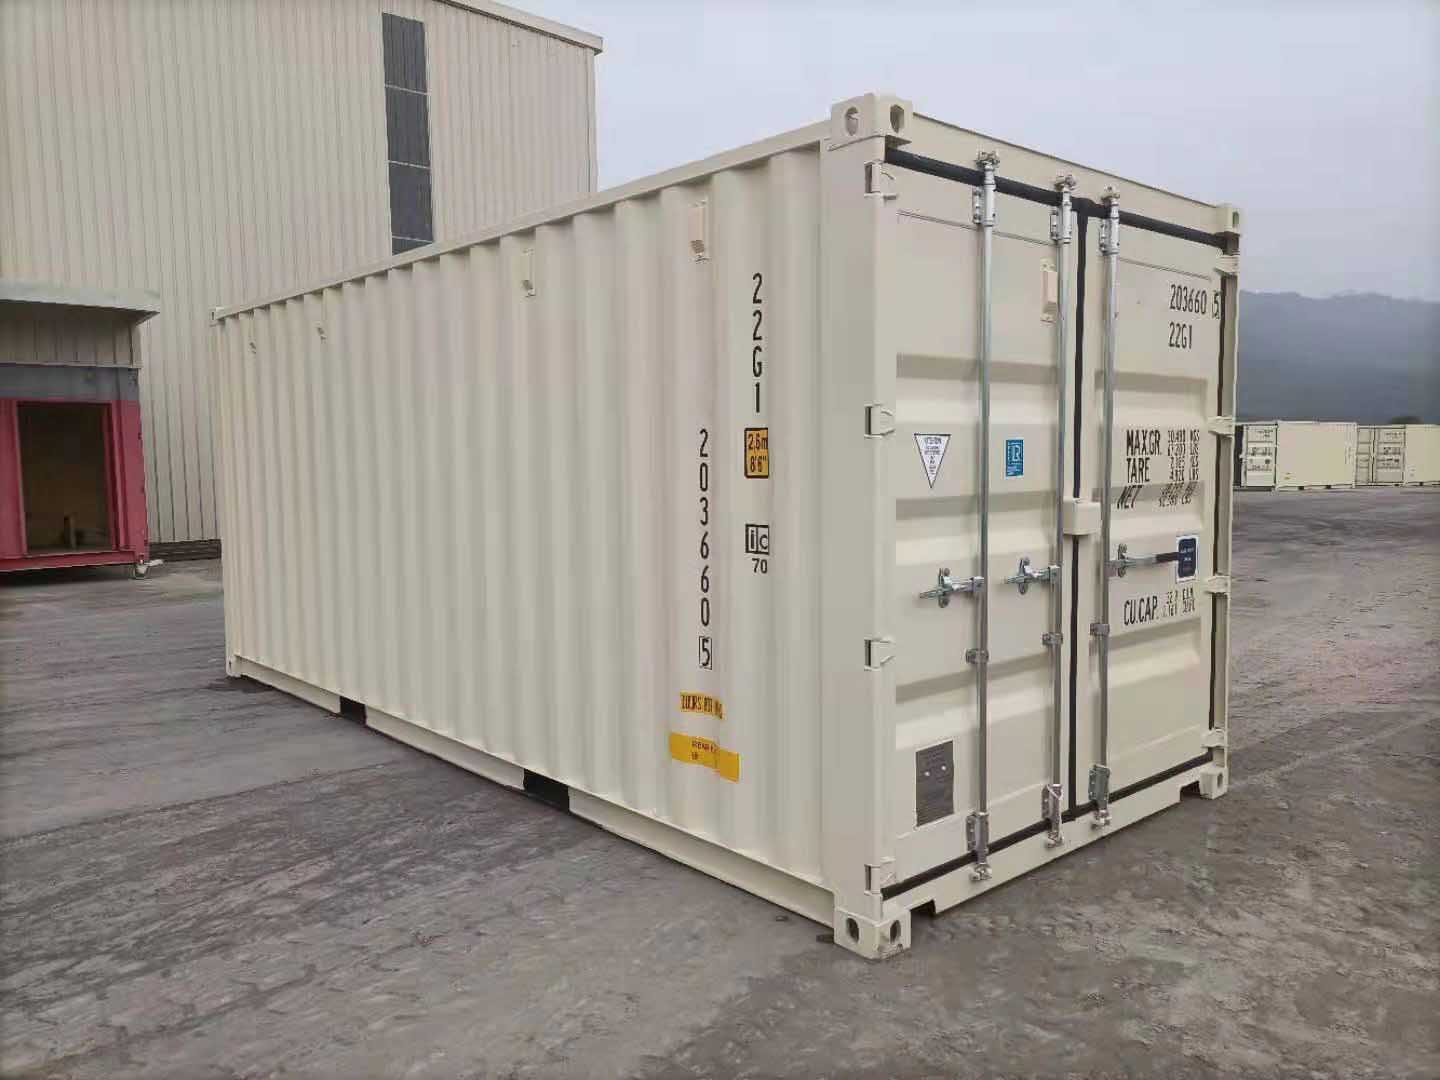 Shipping Containers for Sale in Redondo Beach